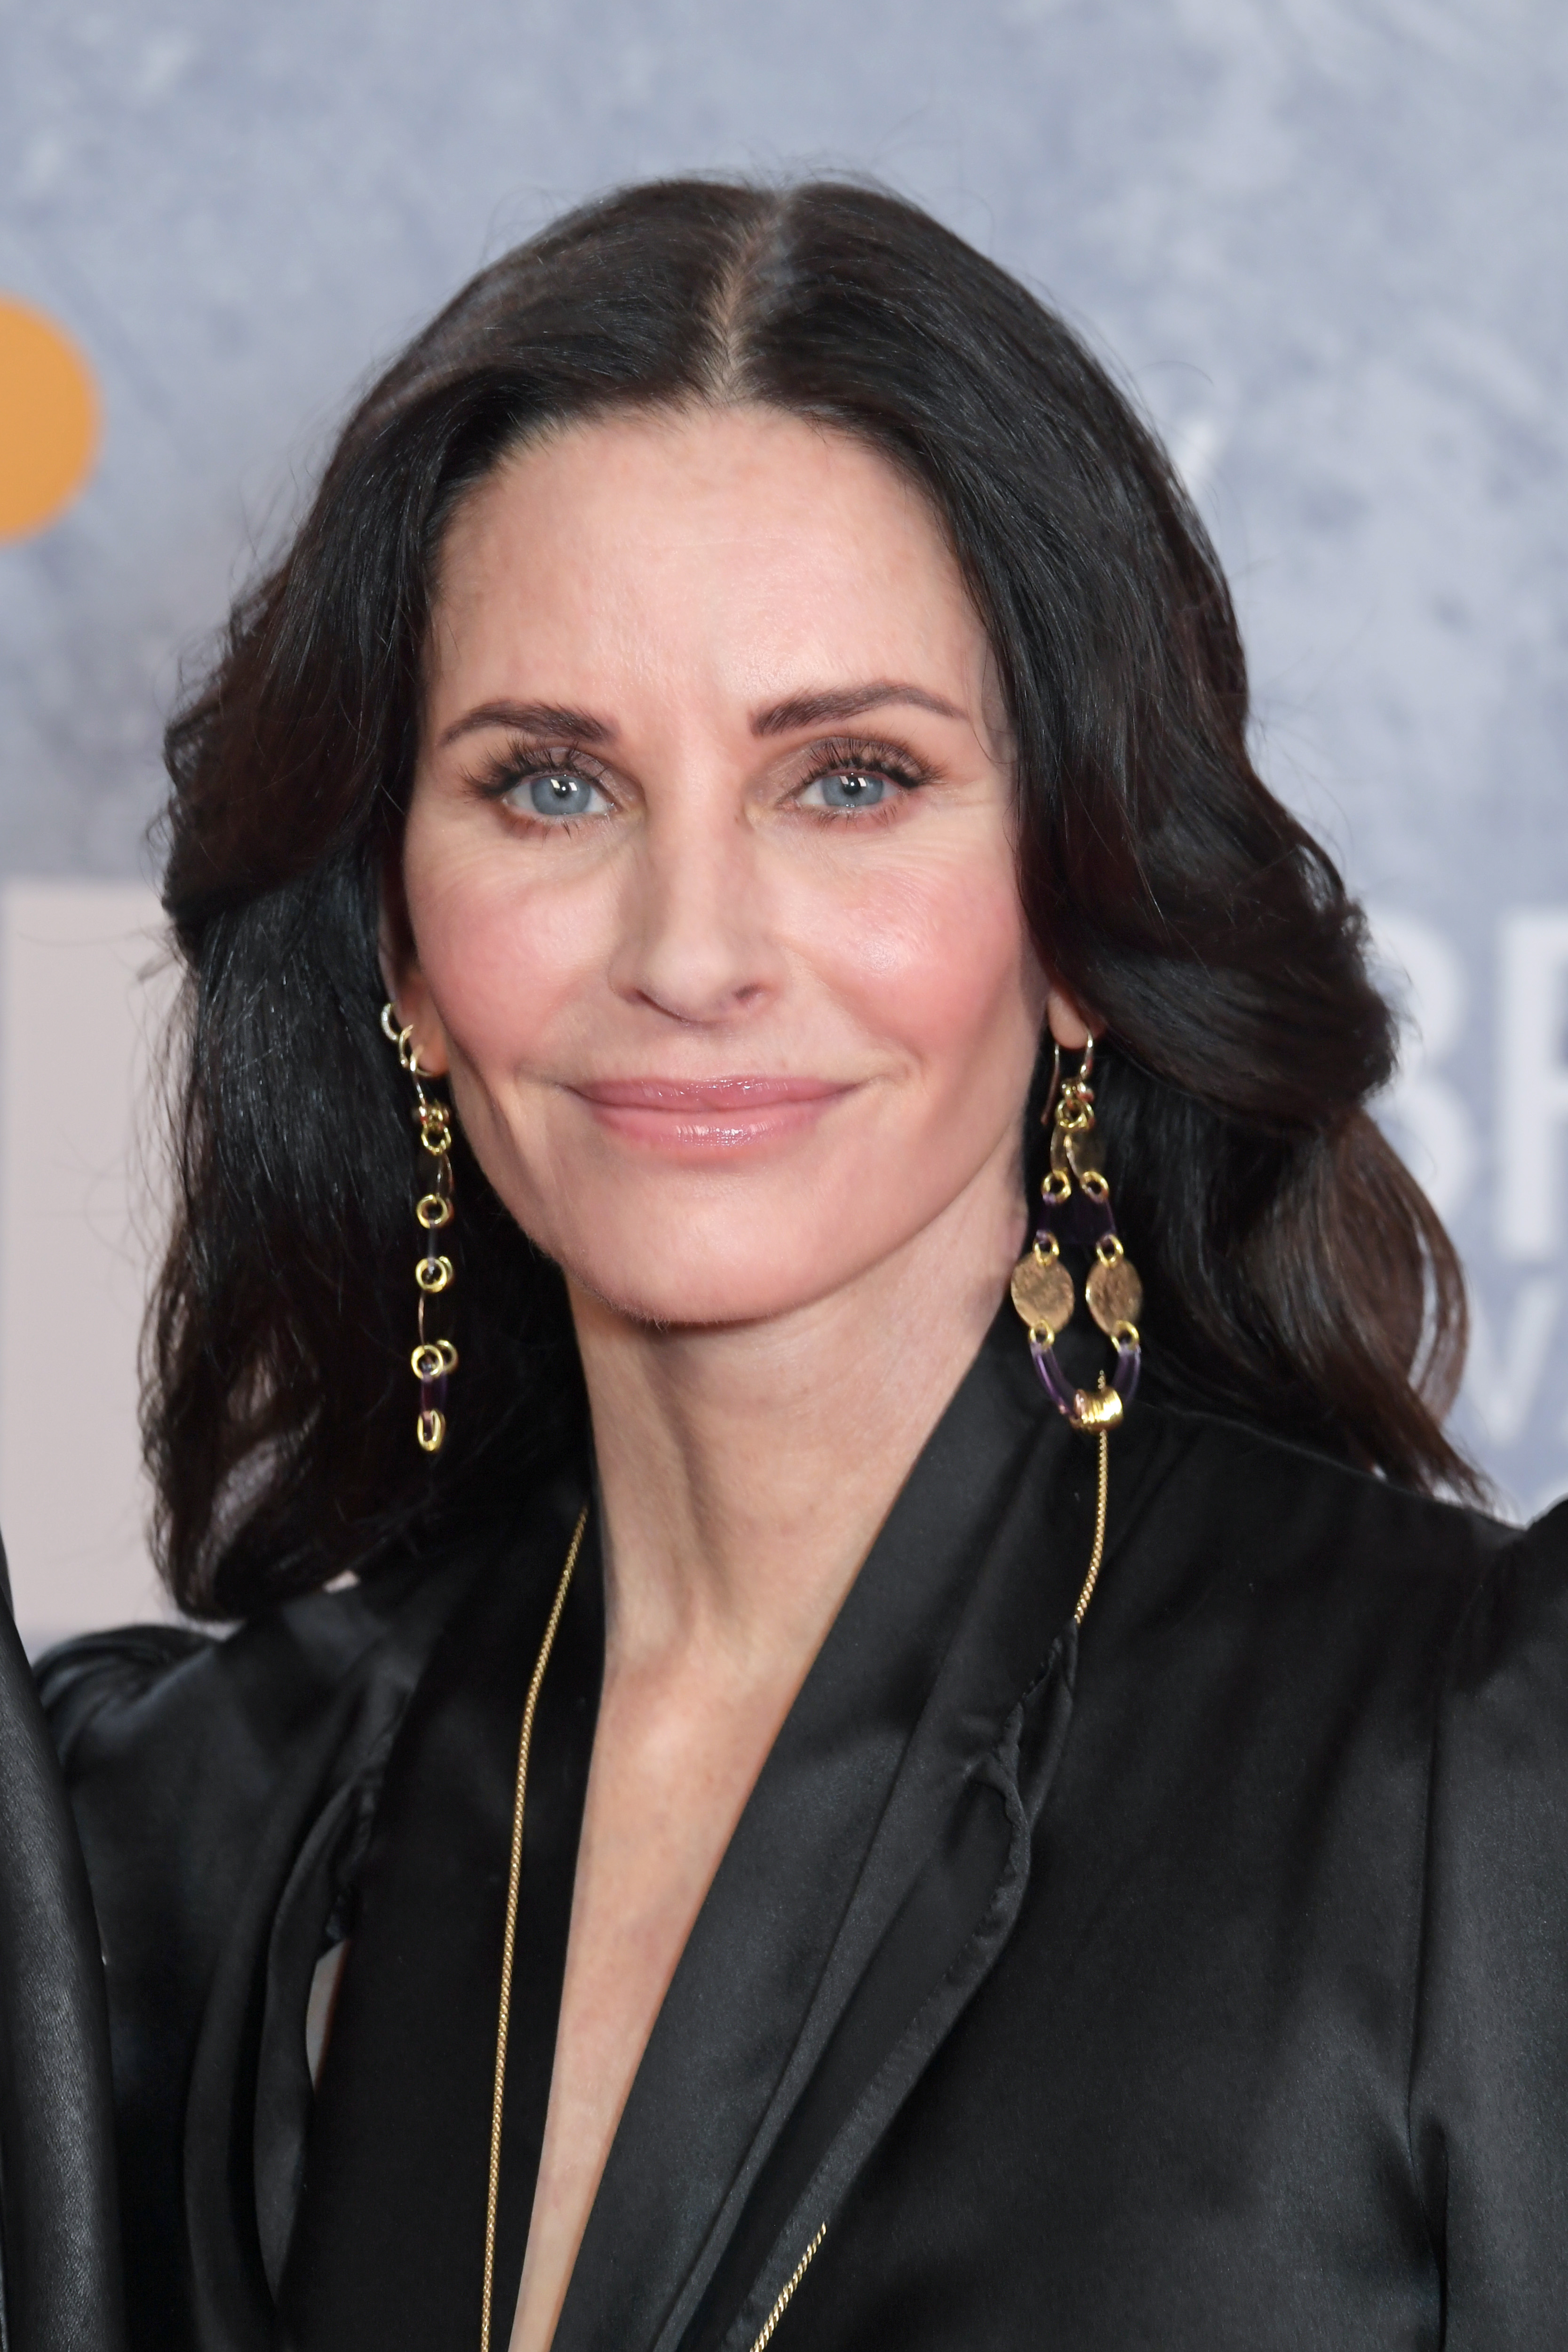 Courteney Cox at the 2022 BRIT Awards on February 8, in London, England. | Source: Getty Images